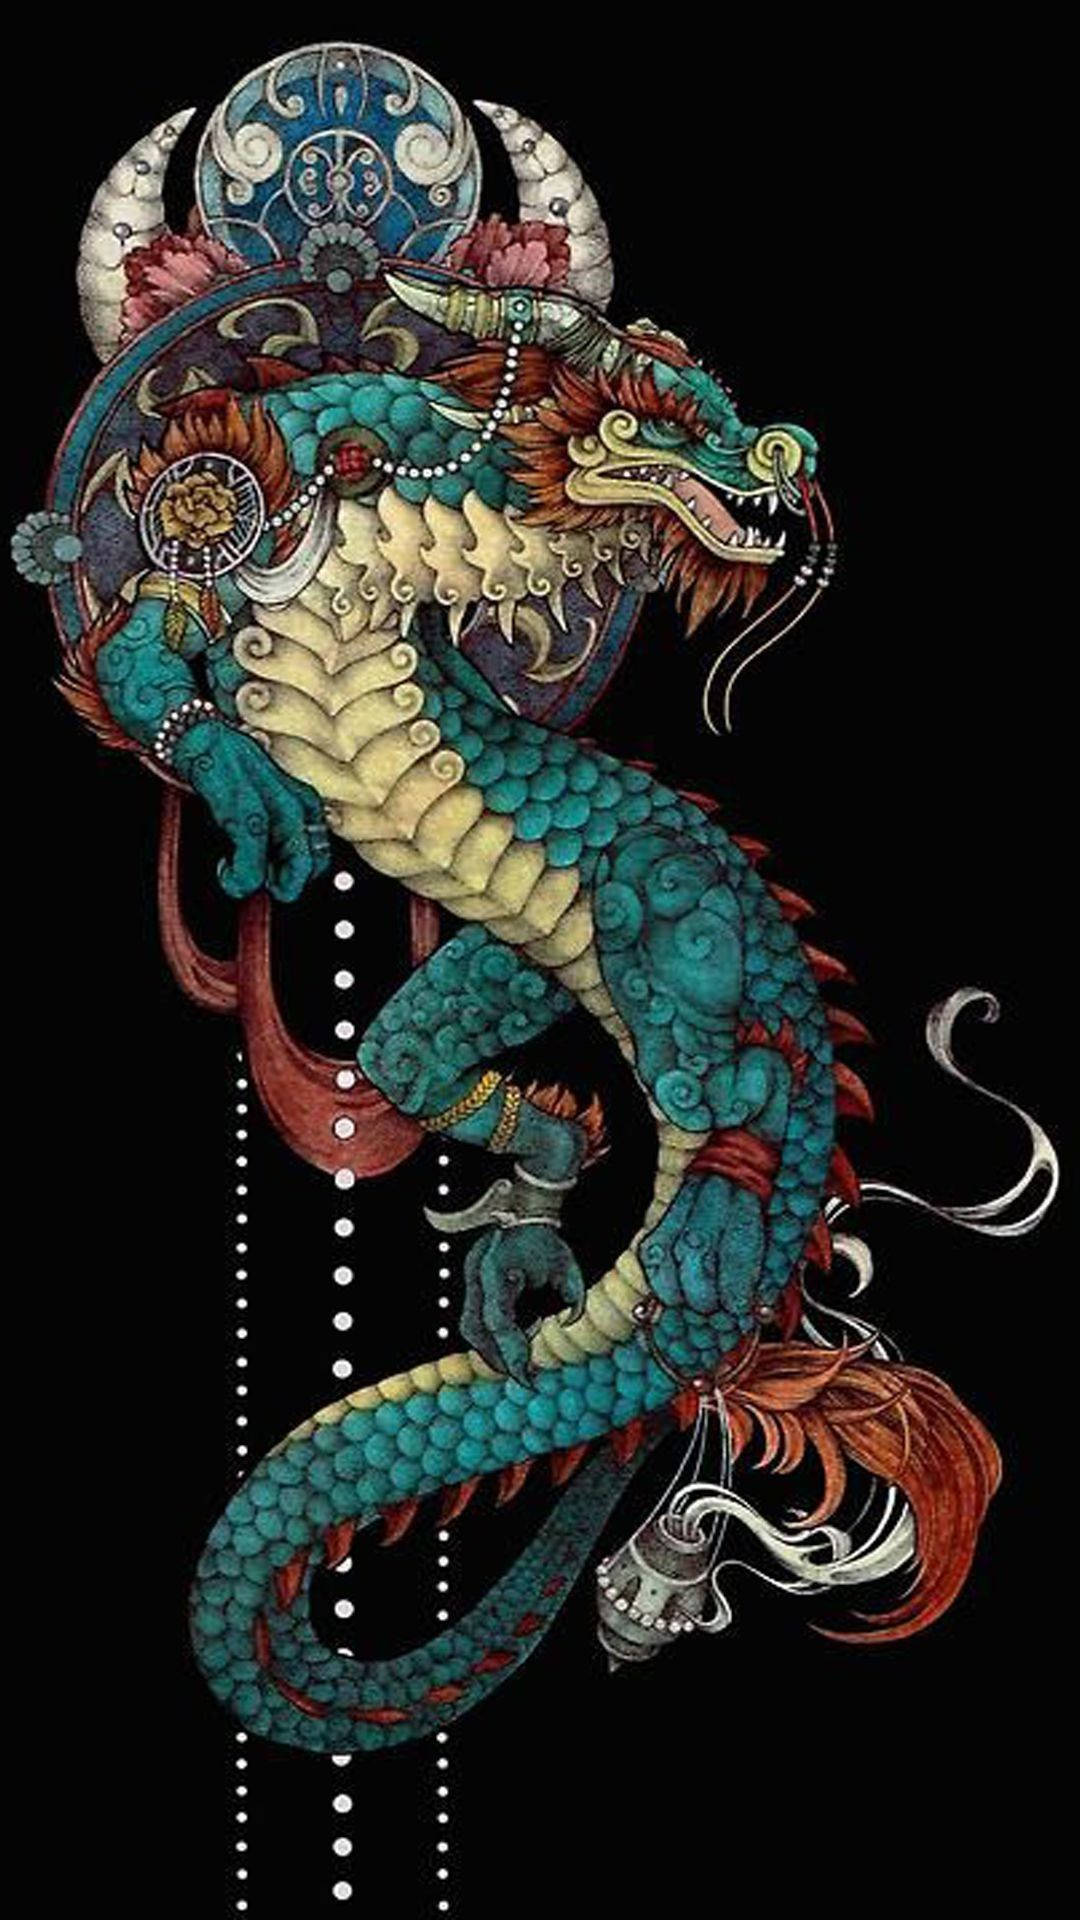 Download Japanese Dragon With Ornaments Wallpaper | Wallpapers.com